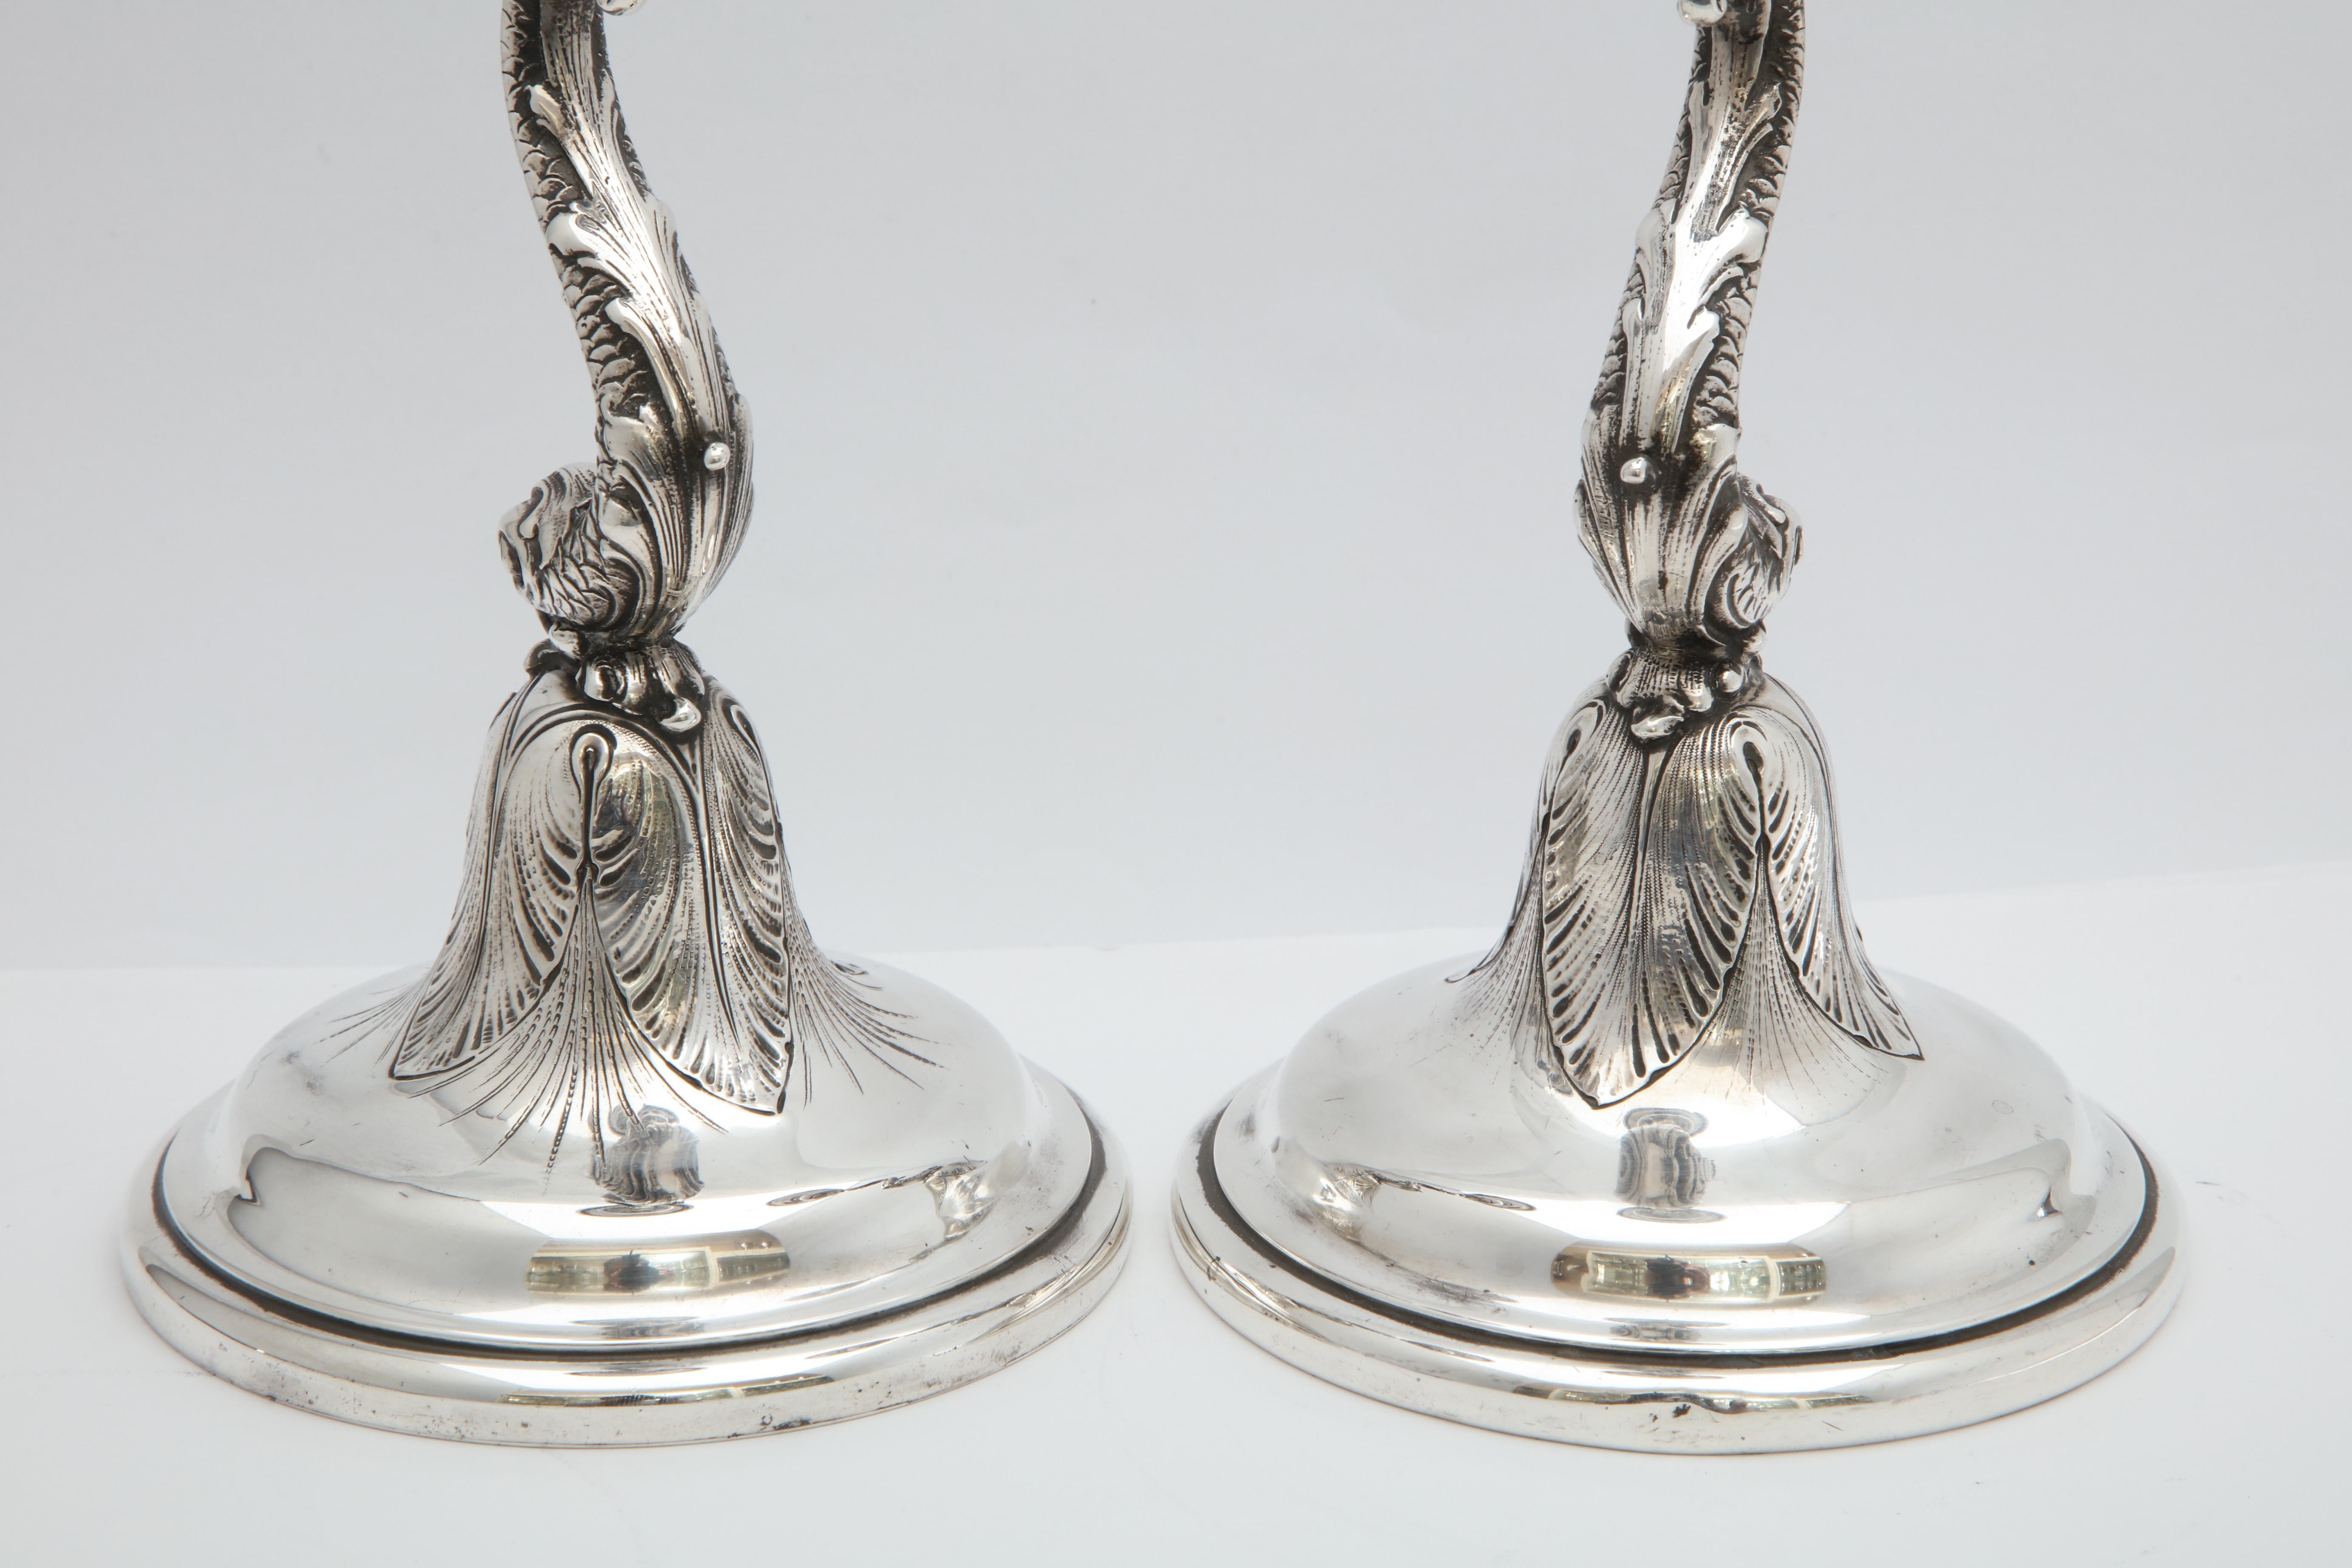 Pair of Art Nouveau Sterling Silver Dolphin-Form Candlesticks by Spaulding 6